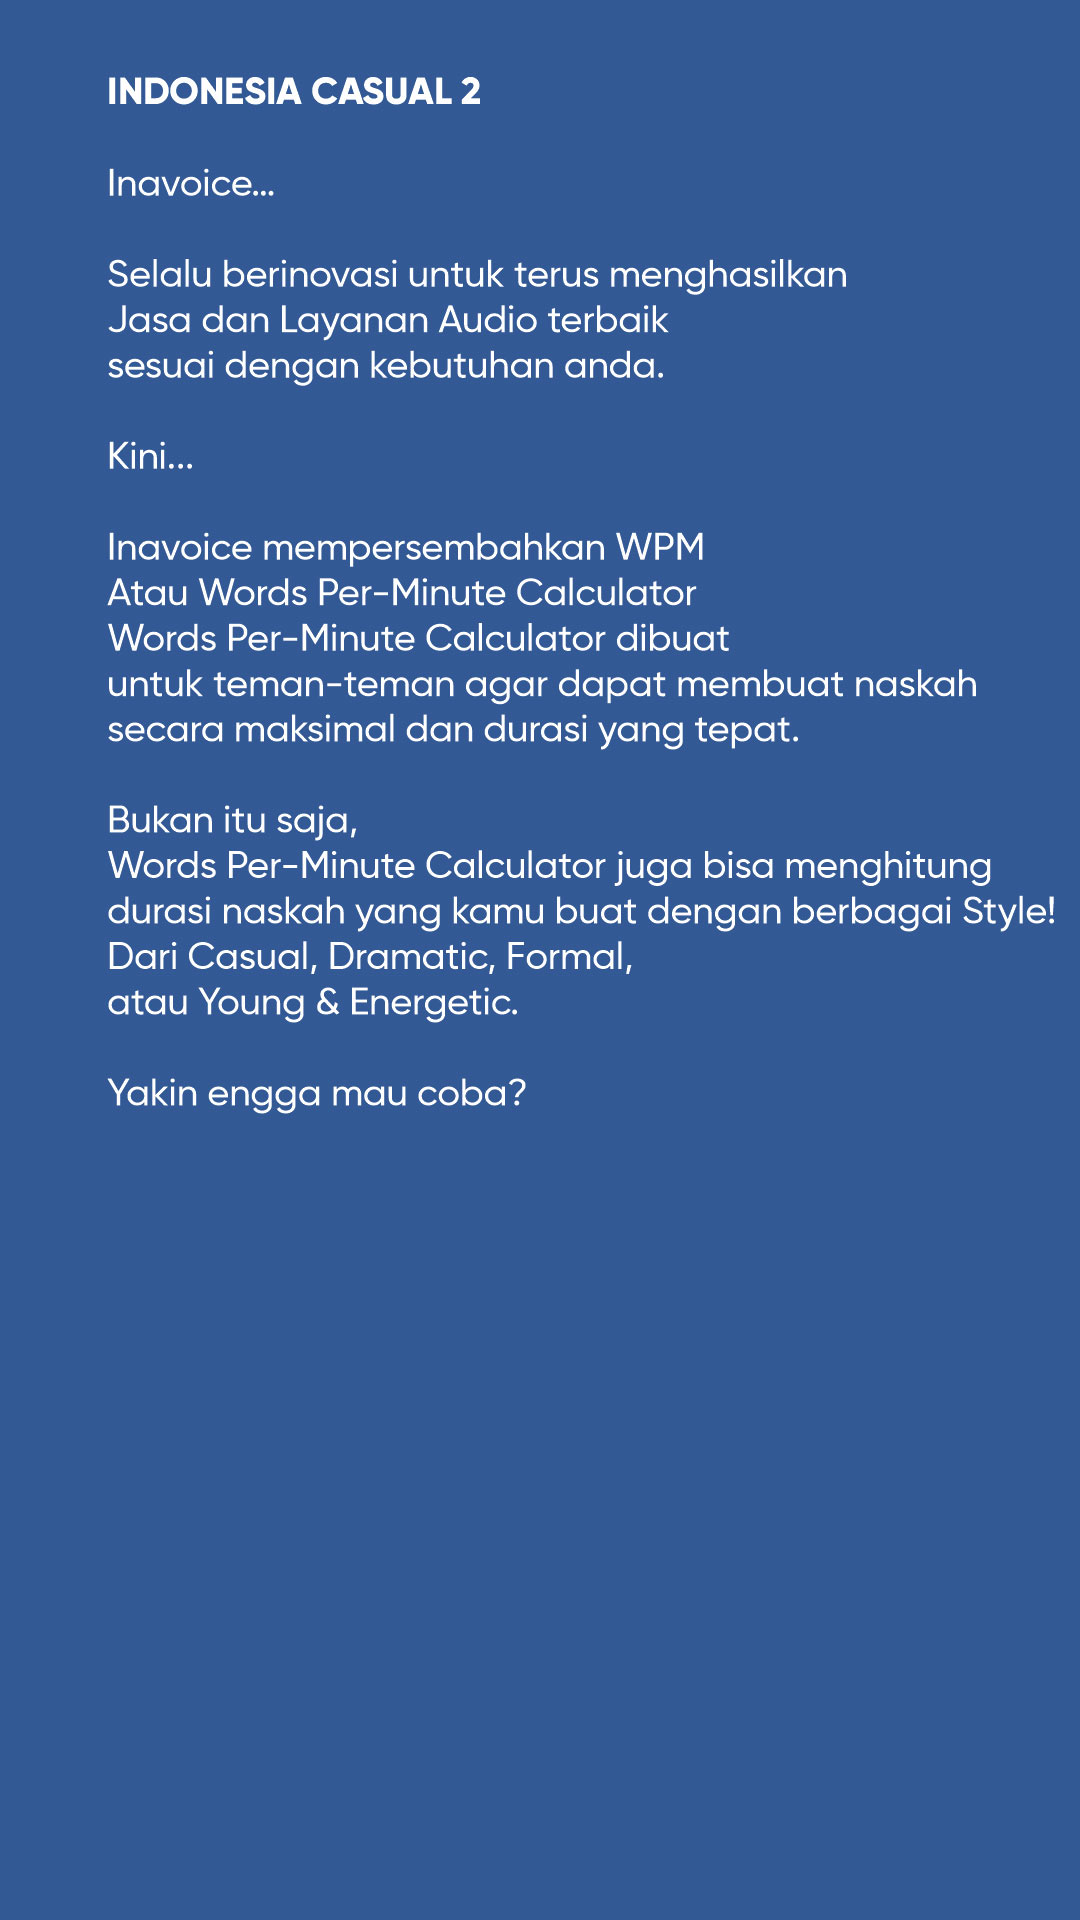 Detail Contoh Voice Over Nomer 4